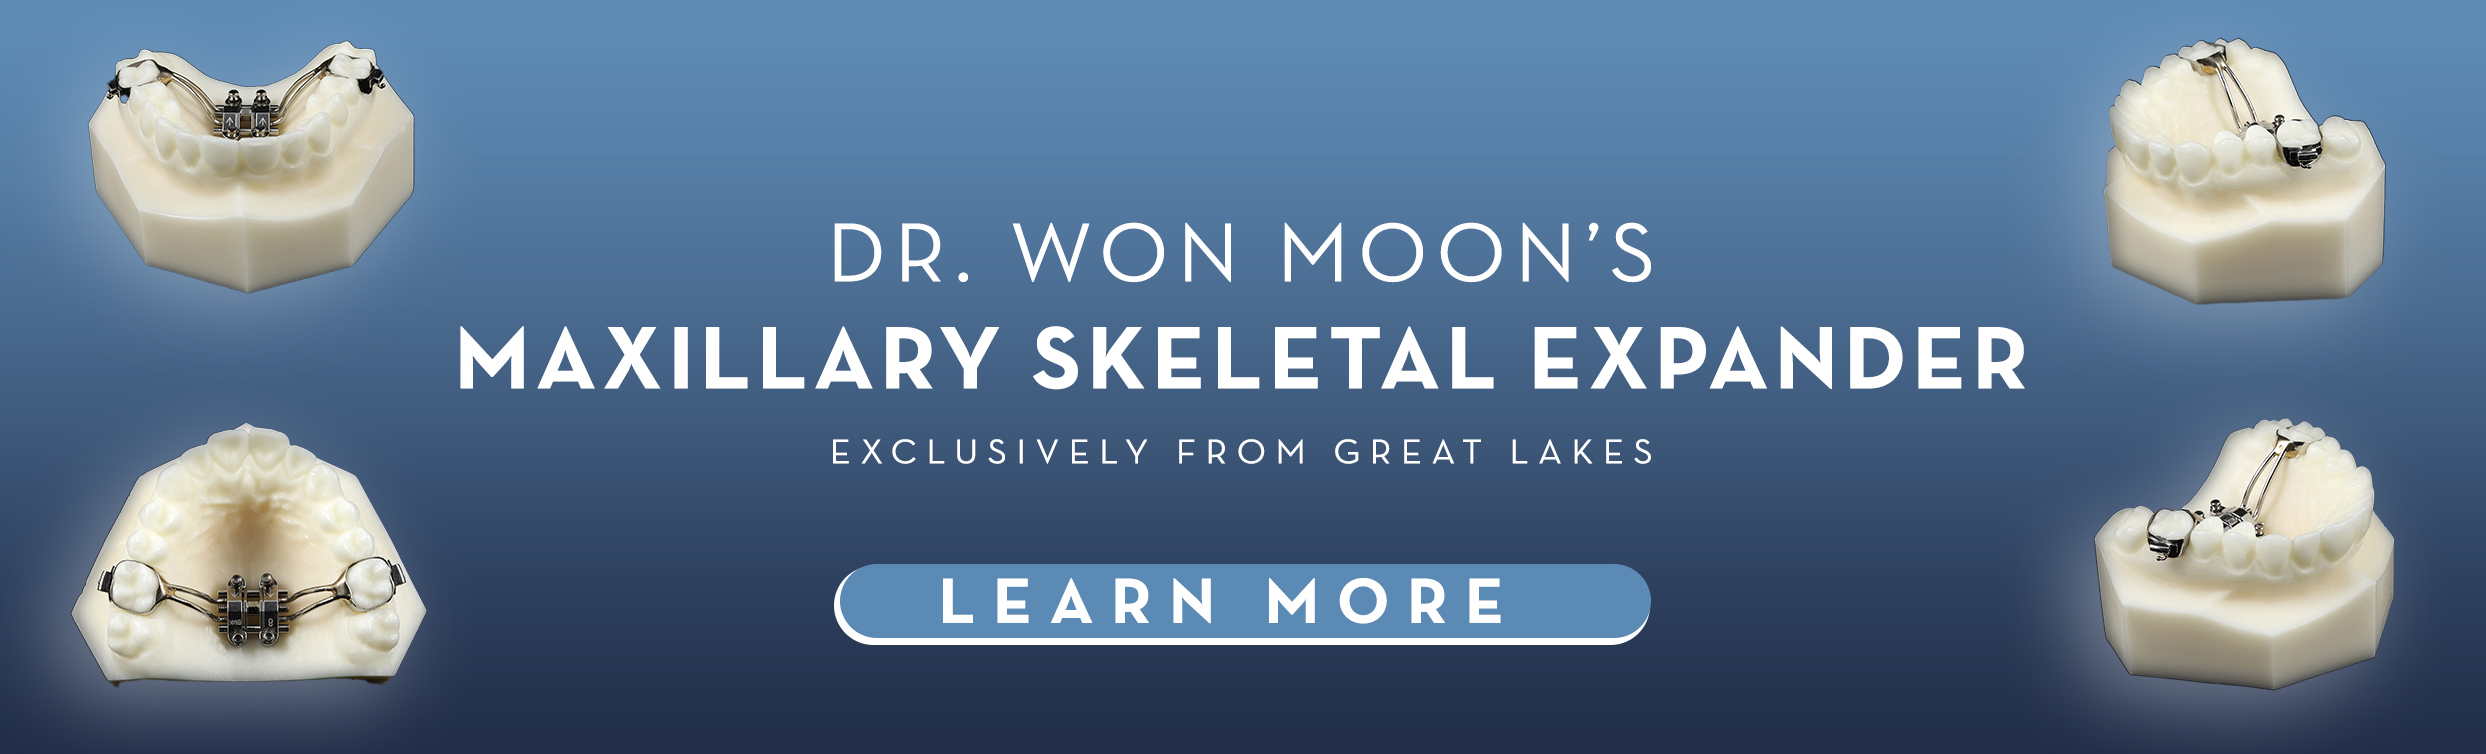 Dr. Won Moon's Maxillary Skeletal Expander (MSE)—Exclusively from Great Lakes